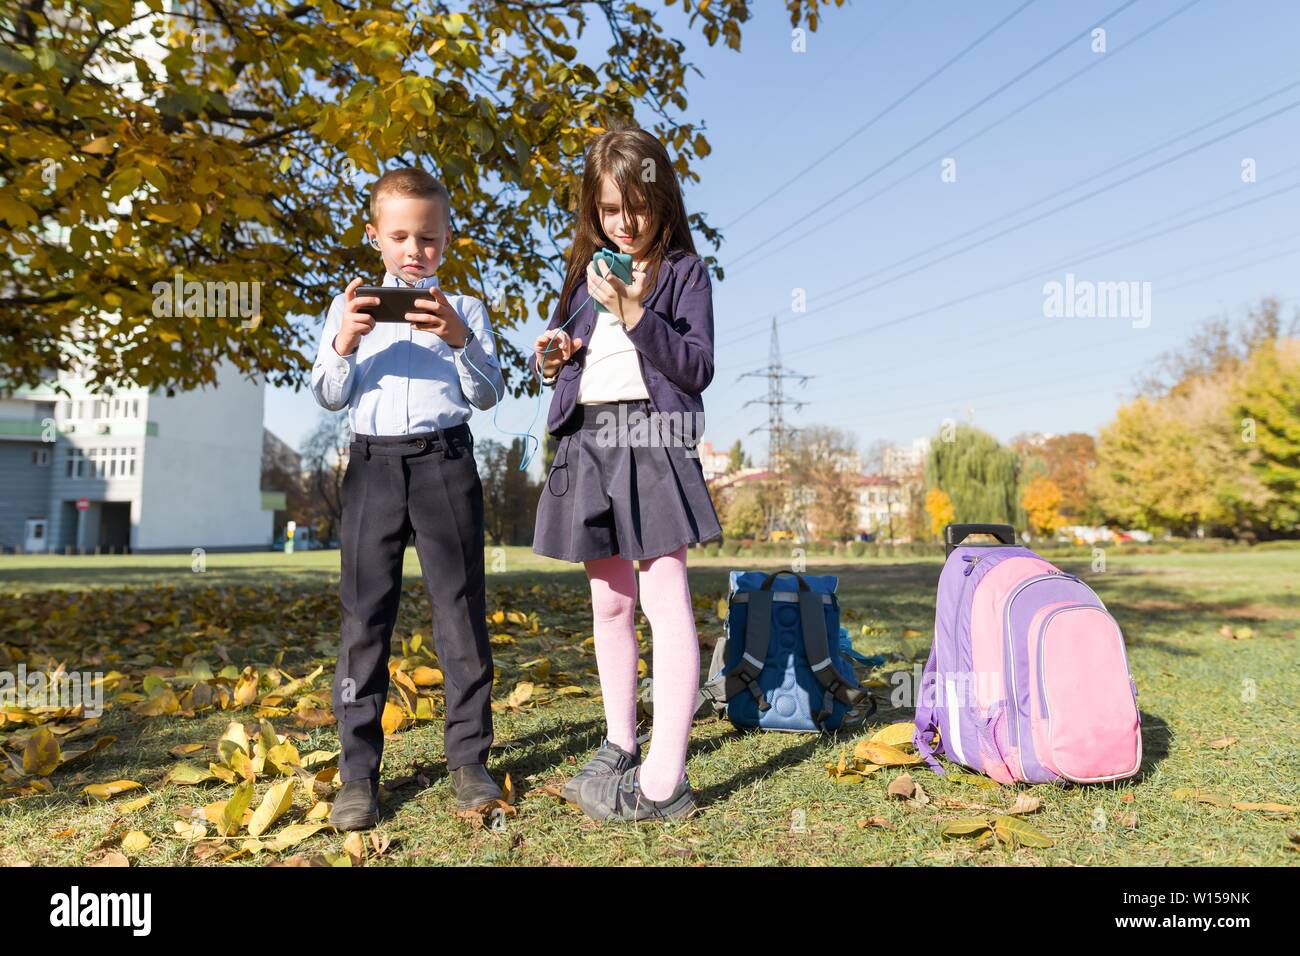 Two children 7, 8 years old with mobile phones, schoolchildren with backpacks looking into smartphones, outdoor background. Education, friendship, tec Stock Photo